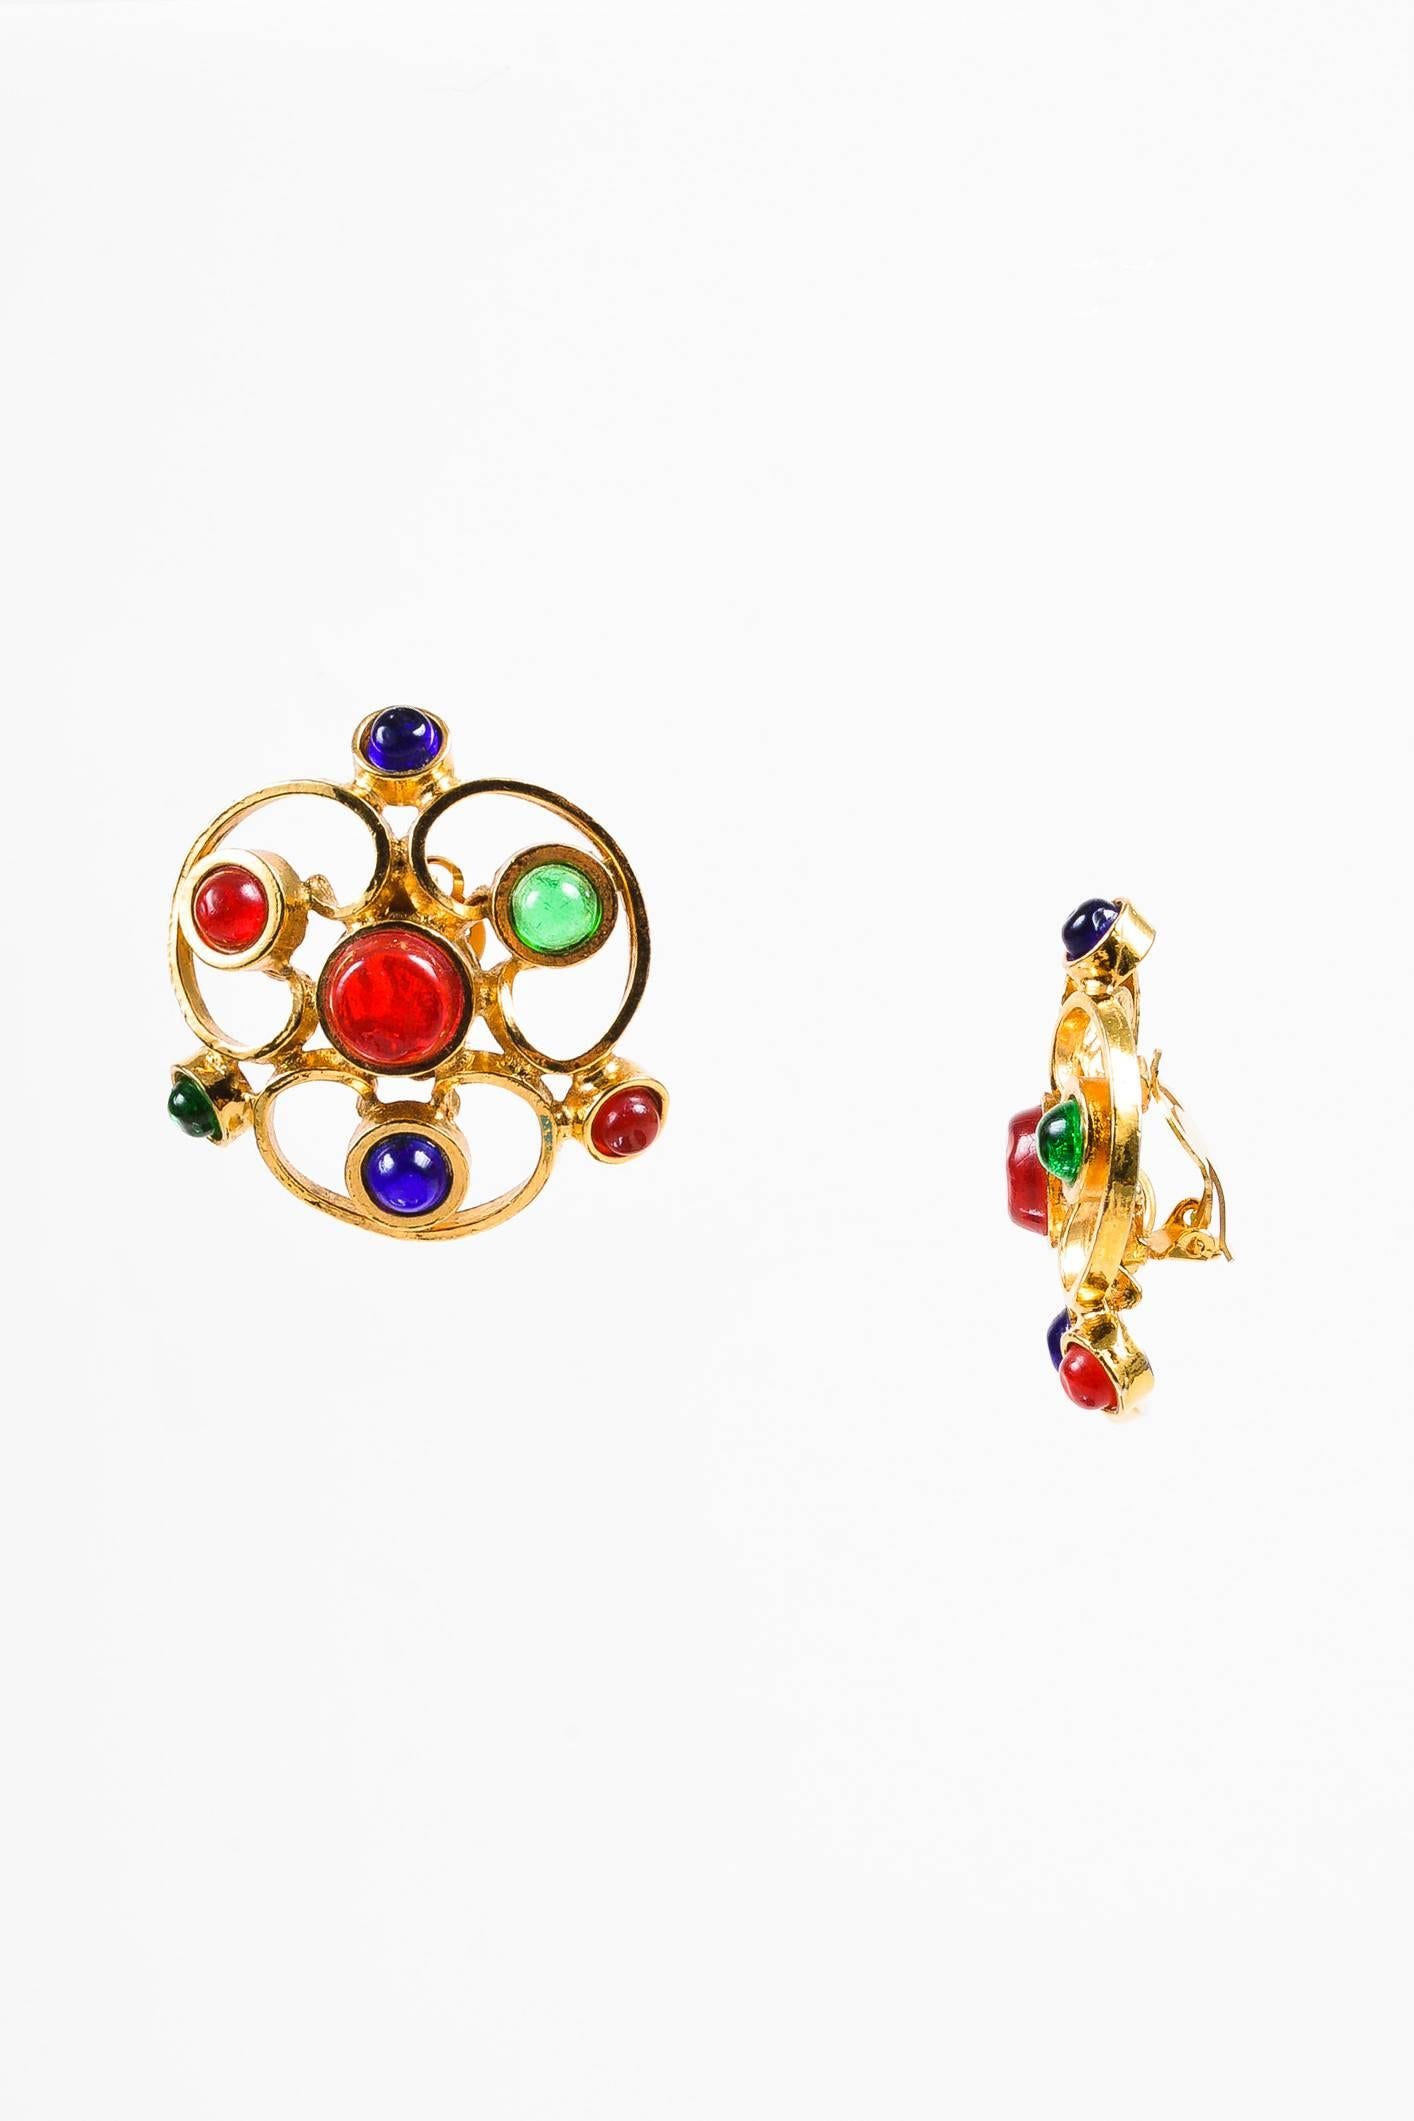 A piece of iconography, this artfully designed earring is detailed with multicolored Gripoix glass stones set in a gold-tone metal. Clip-on back. Pair with a one-shoulder dress to complete the look.

Condition:
Pre-owned. This item is in good